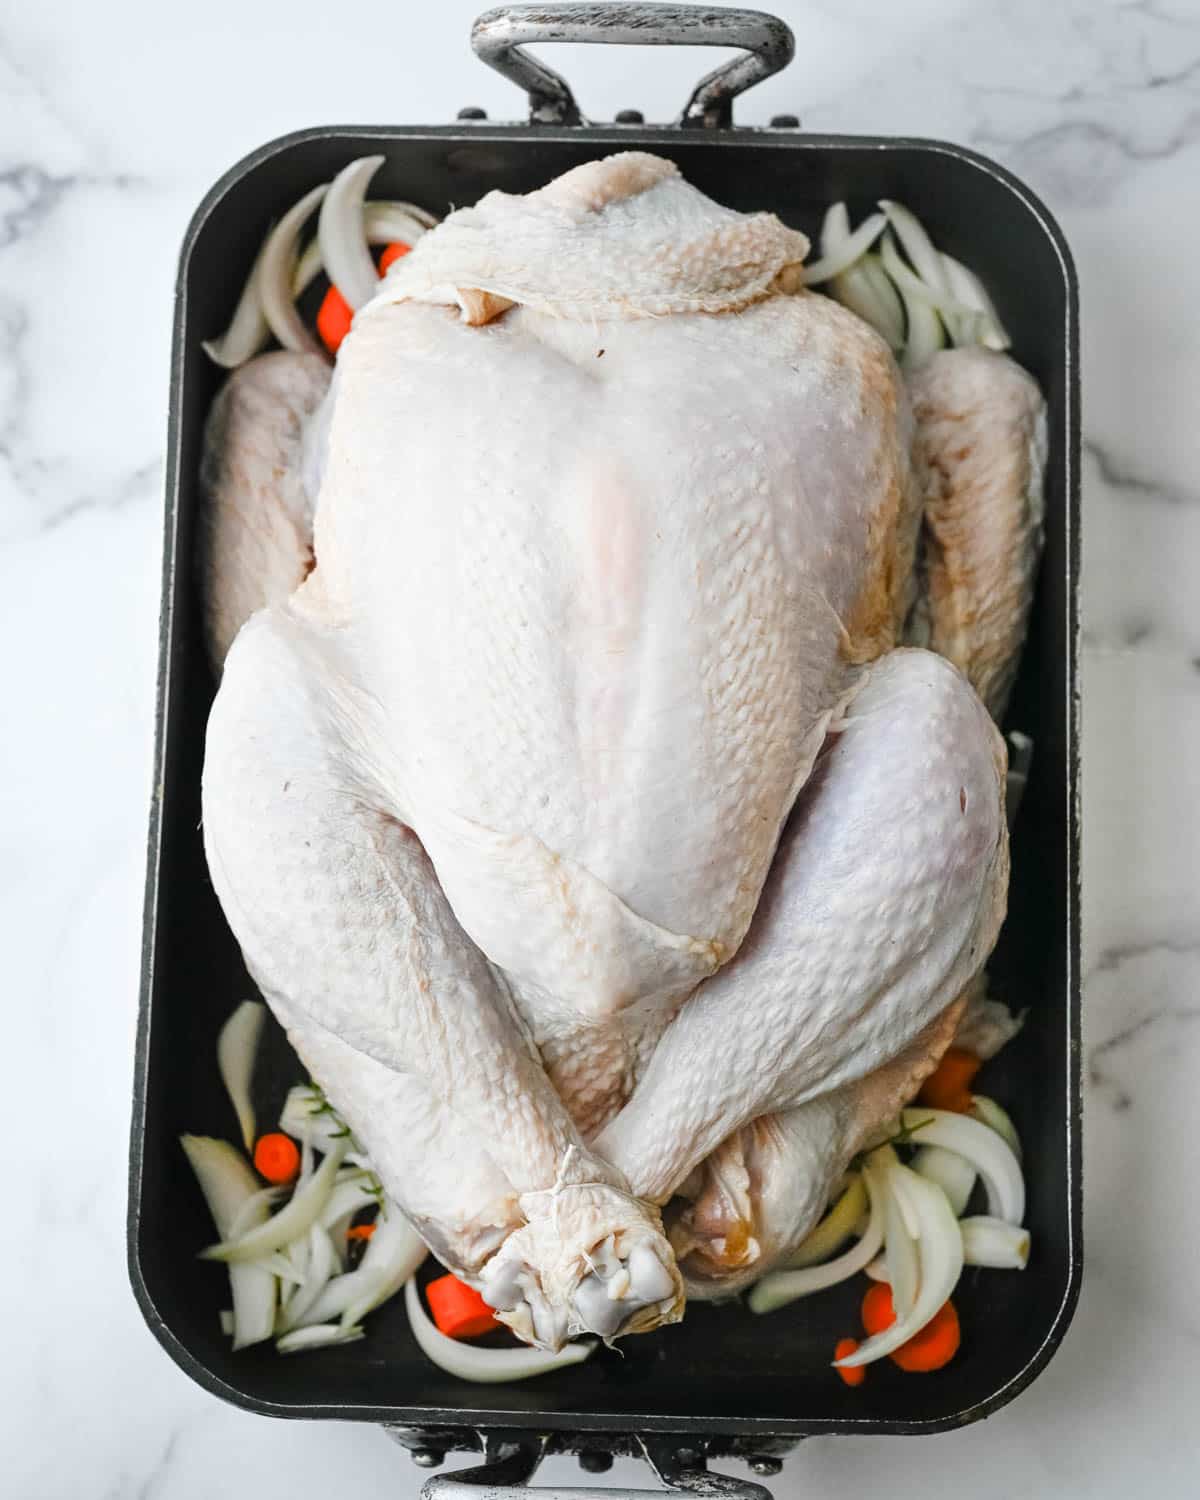 Arranging the brined turkey over a bed of aromatic vegetables.